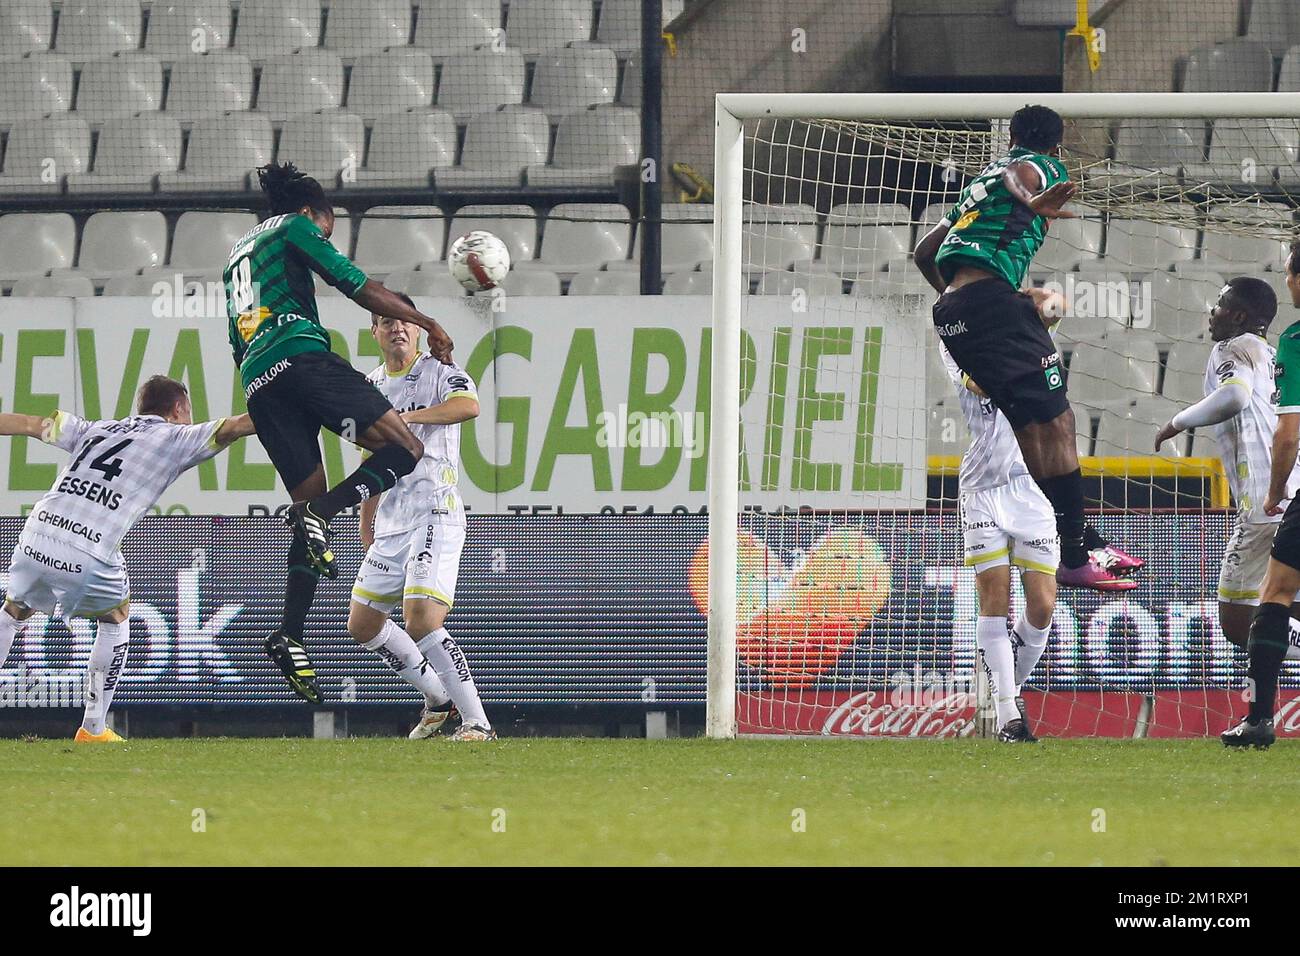 20131019 - BRUGGE, BELGIUM: Cercle's Michael Uchebo fails to score during the Jupiler Pro League match between Cercle Brugge and Zulte Waregem, in Brugge, Saturday 19 October 2013, on day 11 of the Belgian soccer championship. BELGA PHOTO BRUNO FAHY Stock Photo